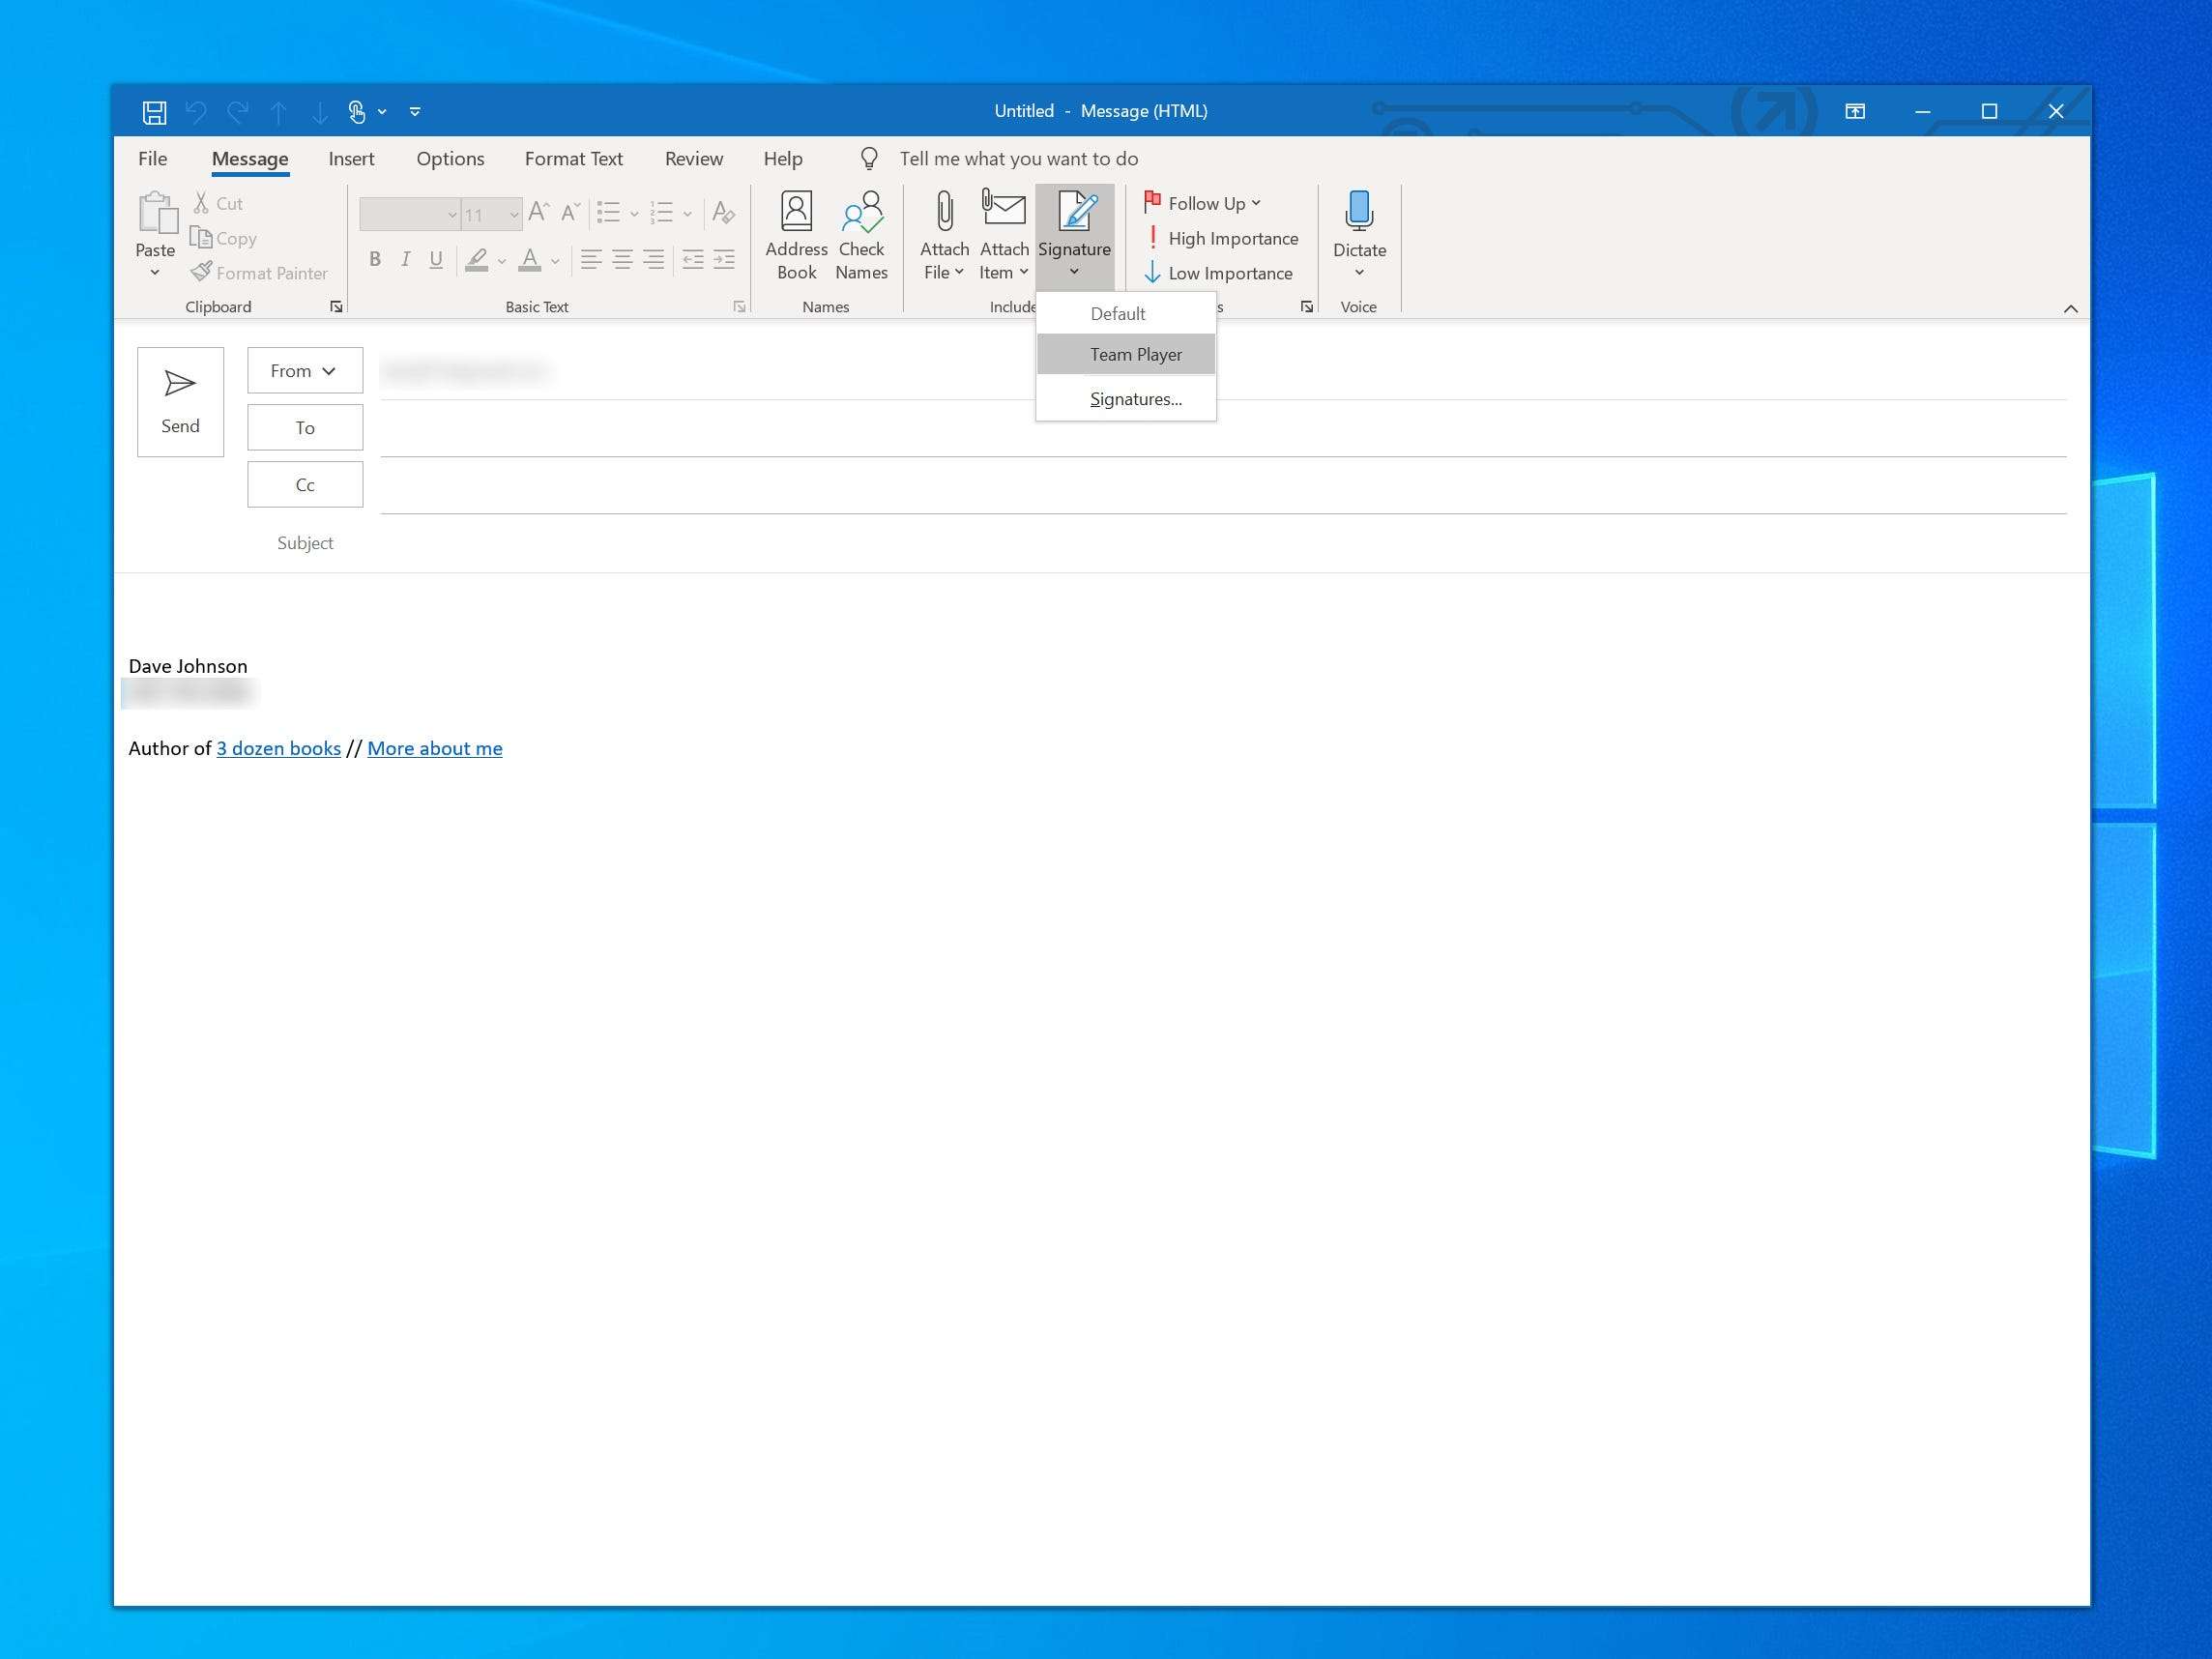 how to add a signature to all emails in outlook